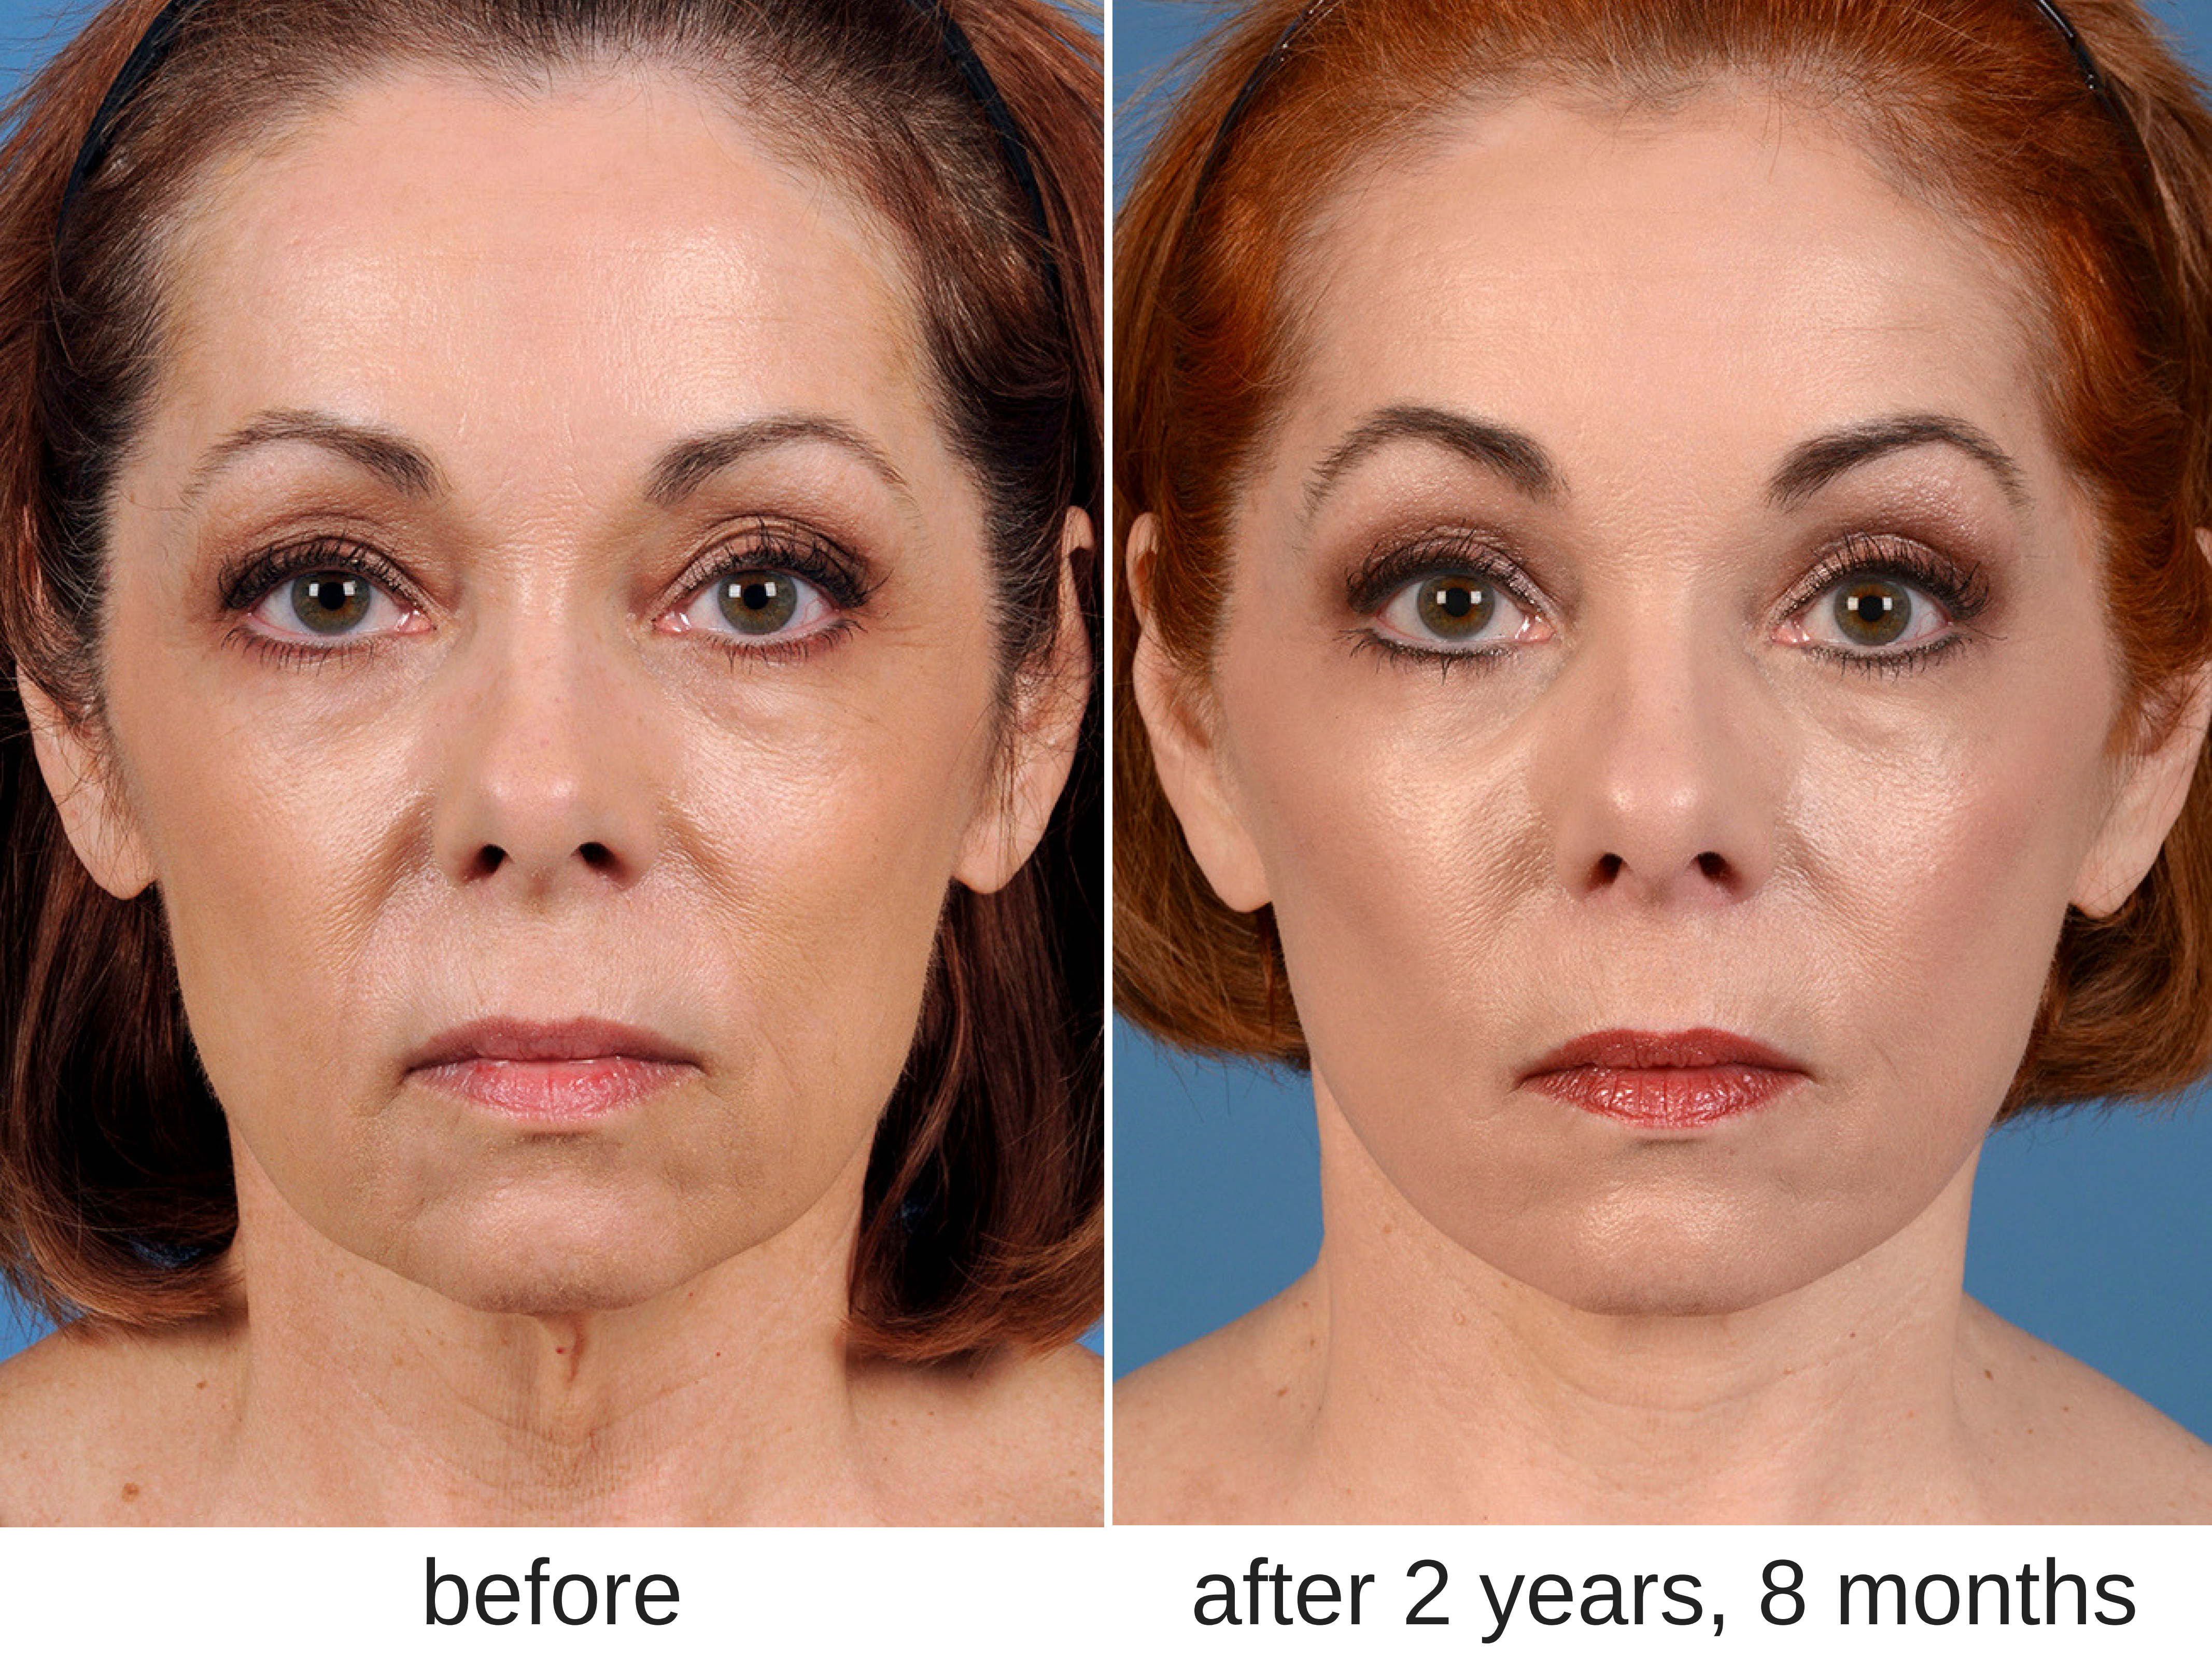 Face the Facts: Improving Facial Appearance with a Natural Look